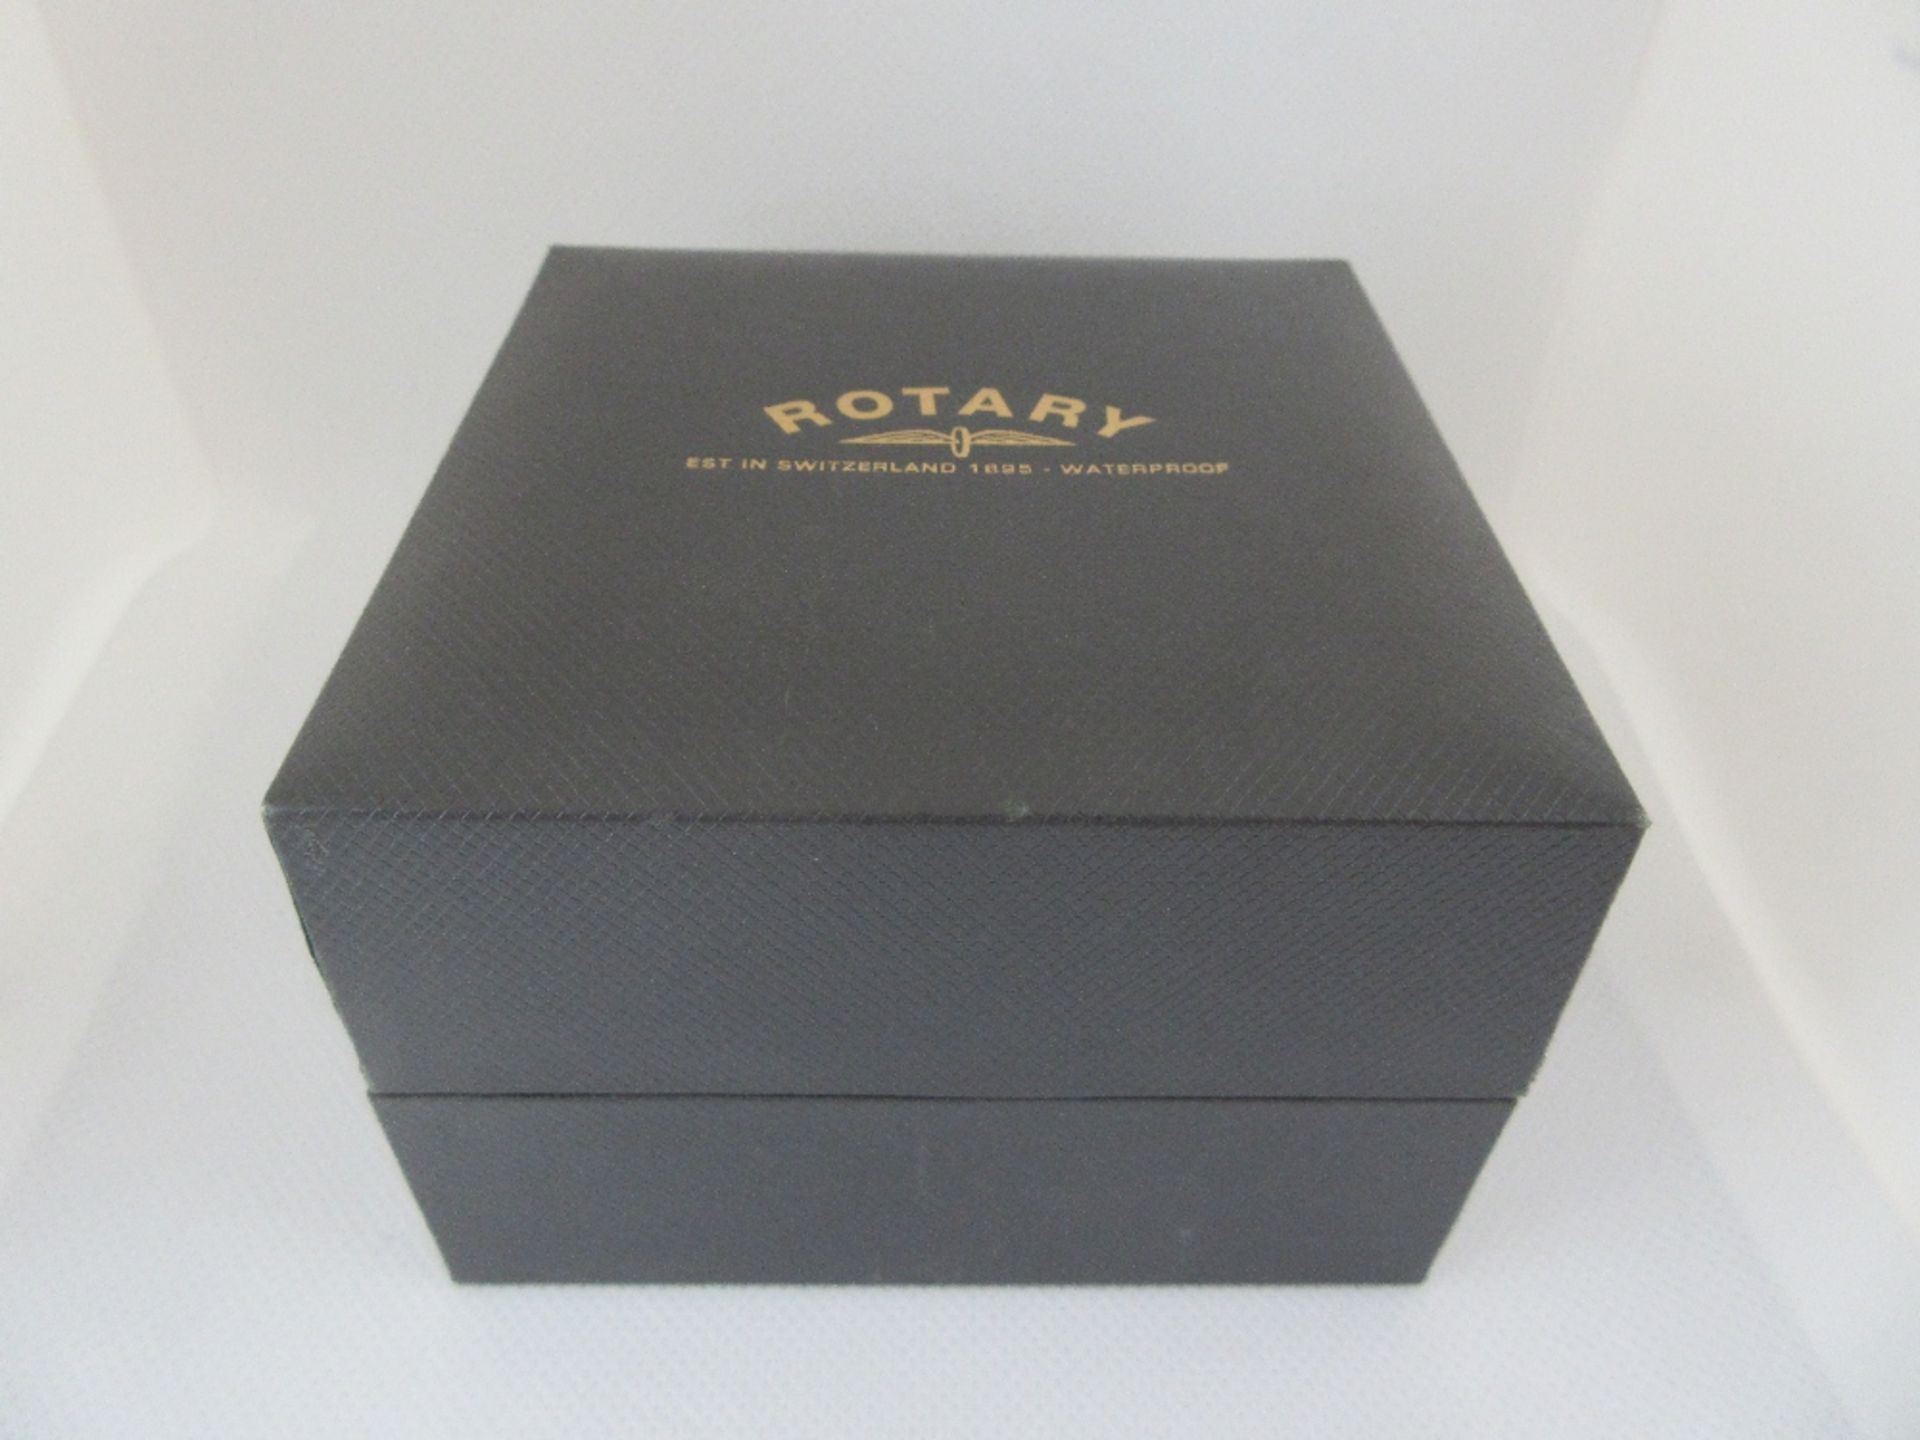 ROTARY MALE WATCH, MODEL GS02283/01S, CASE DIAMETER 28MM, LEATHER STRAP, BOXED - Image 4 of 4